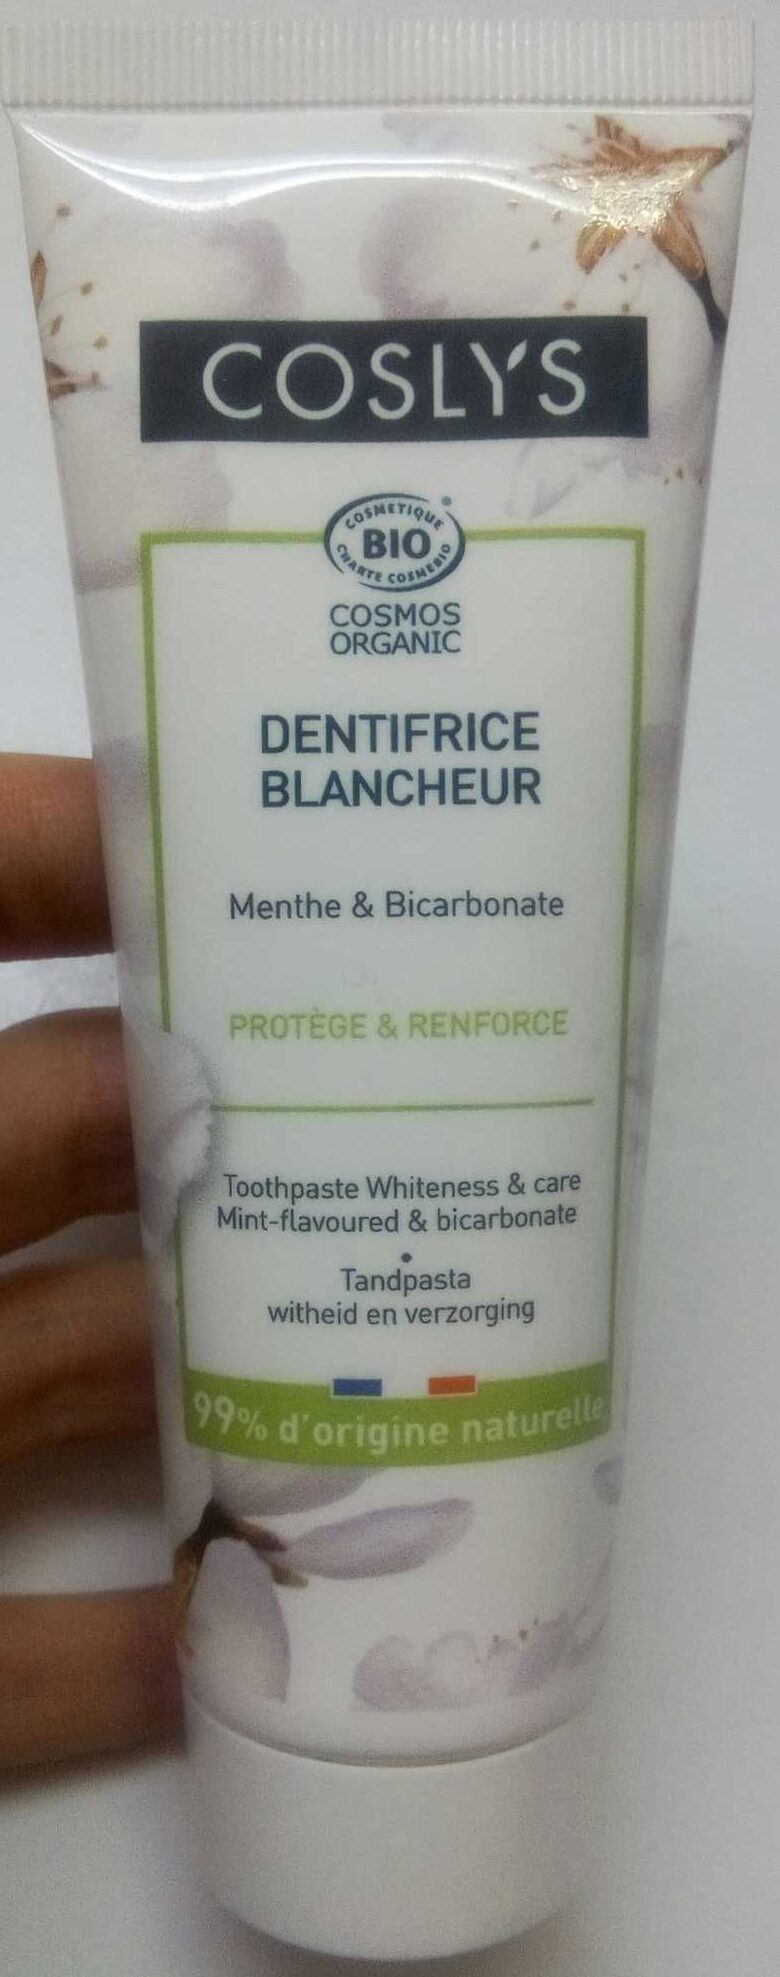 Dentifrice Blancheur - Product - fr